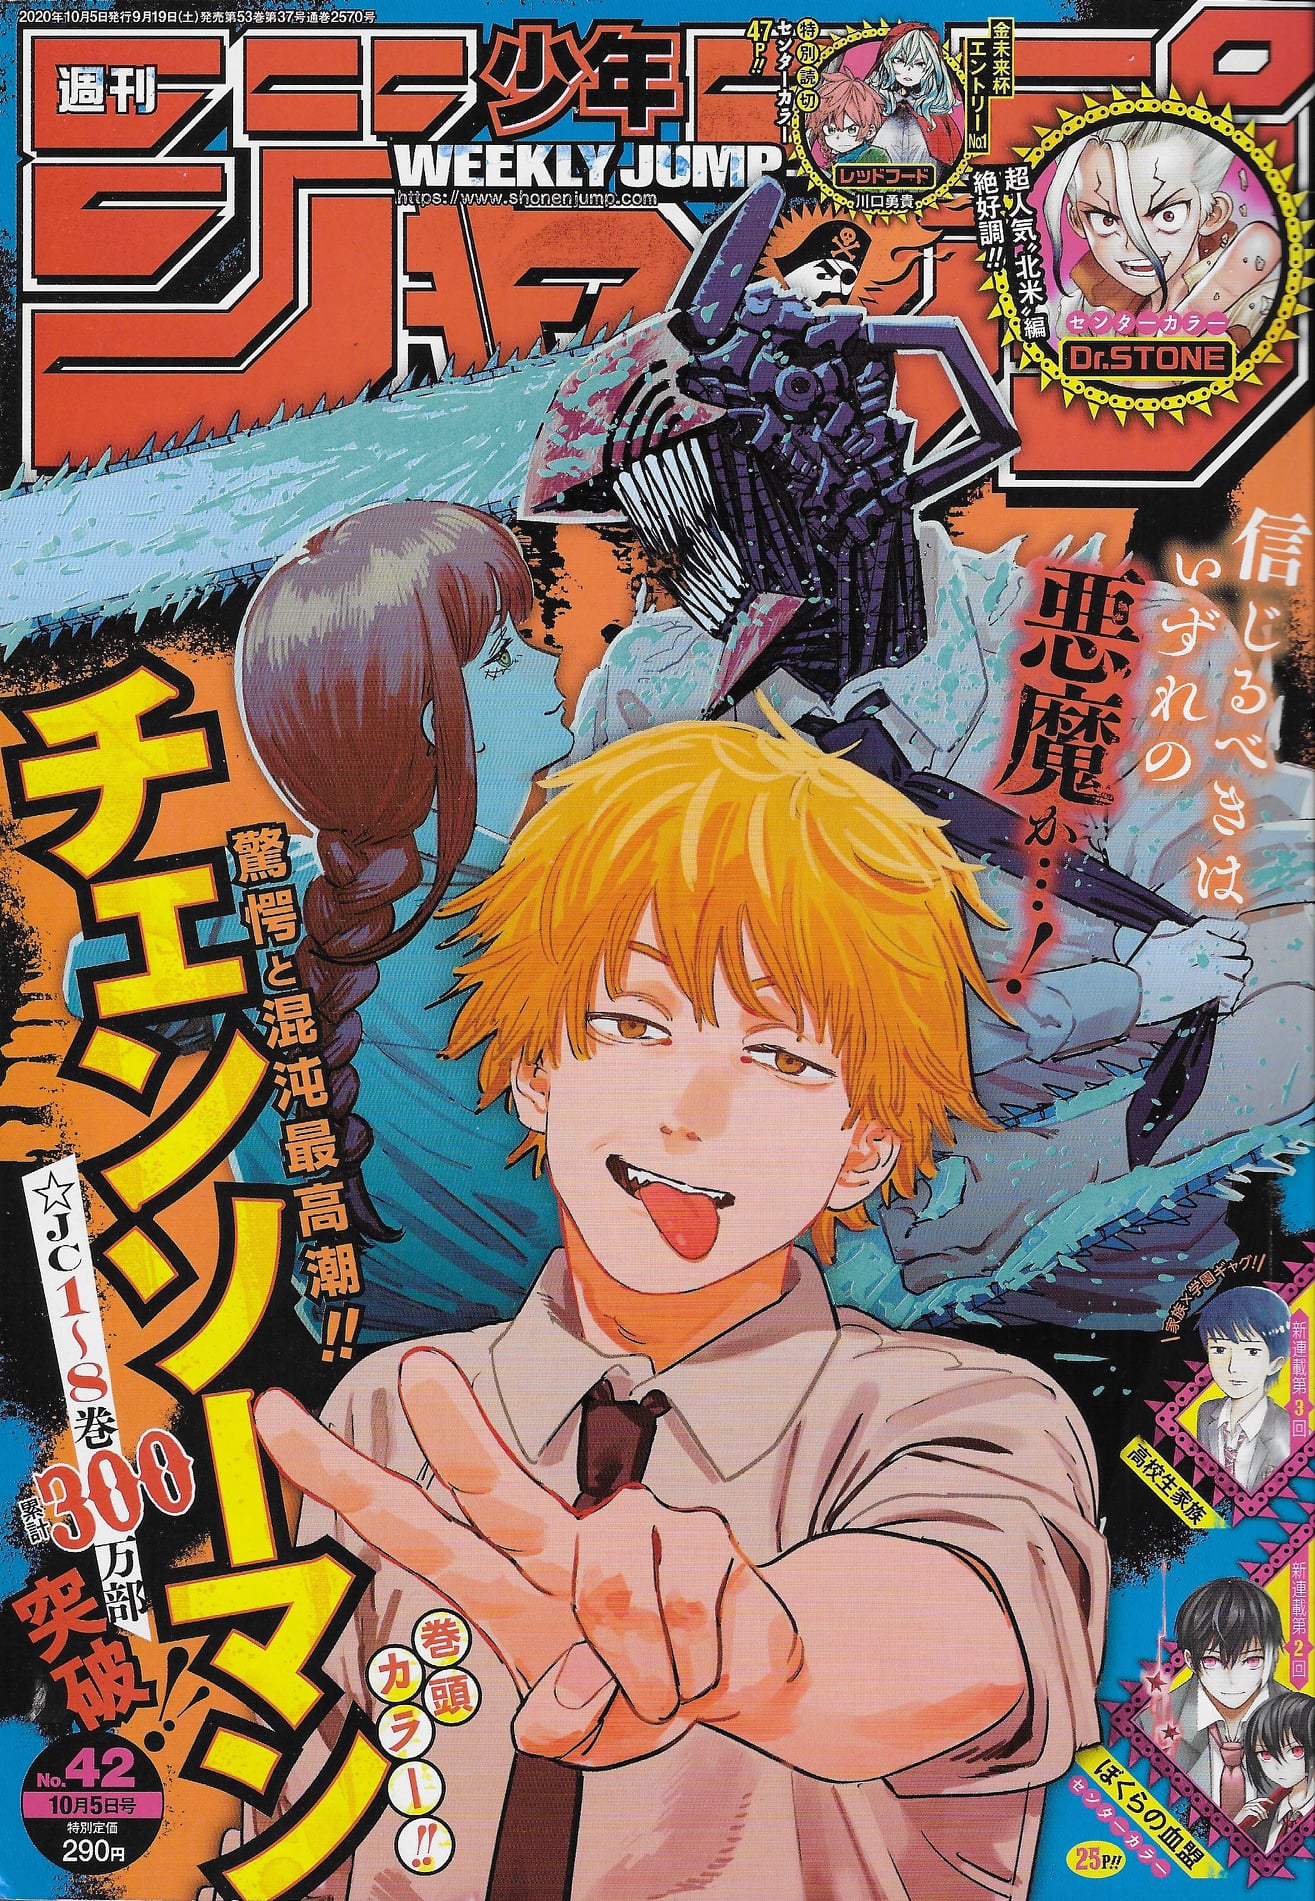 Análise – TOC Weekly Shonen Jump #39 (Ano 2020). - Analyse It